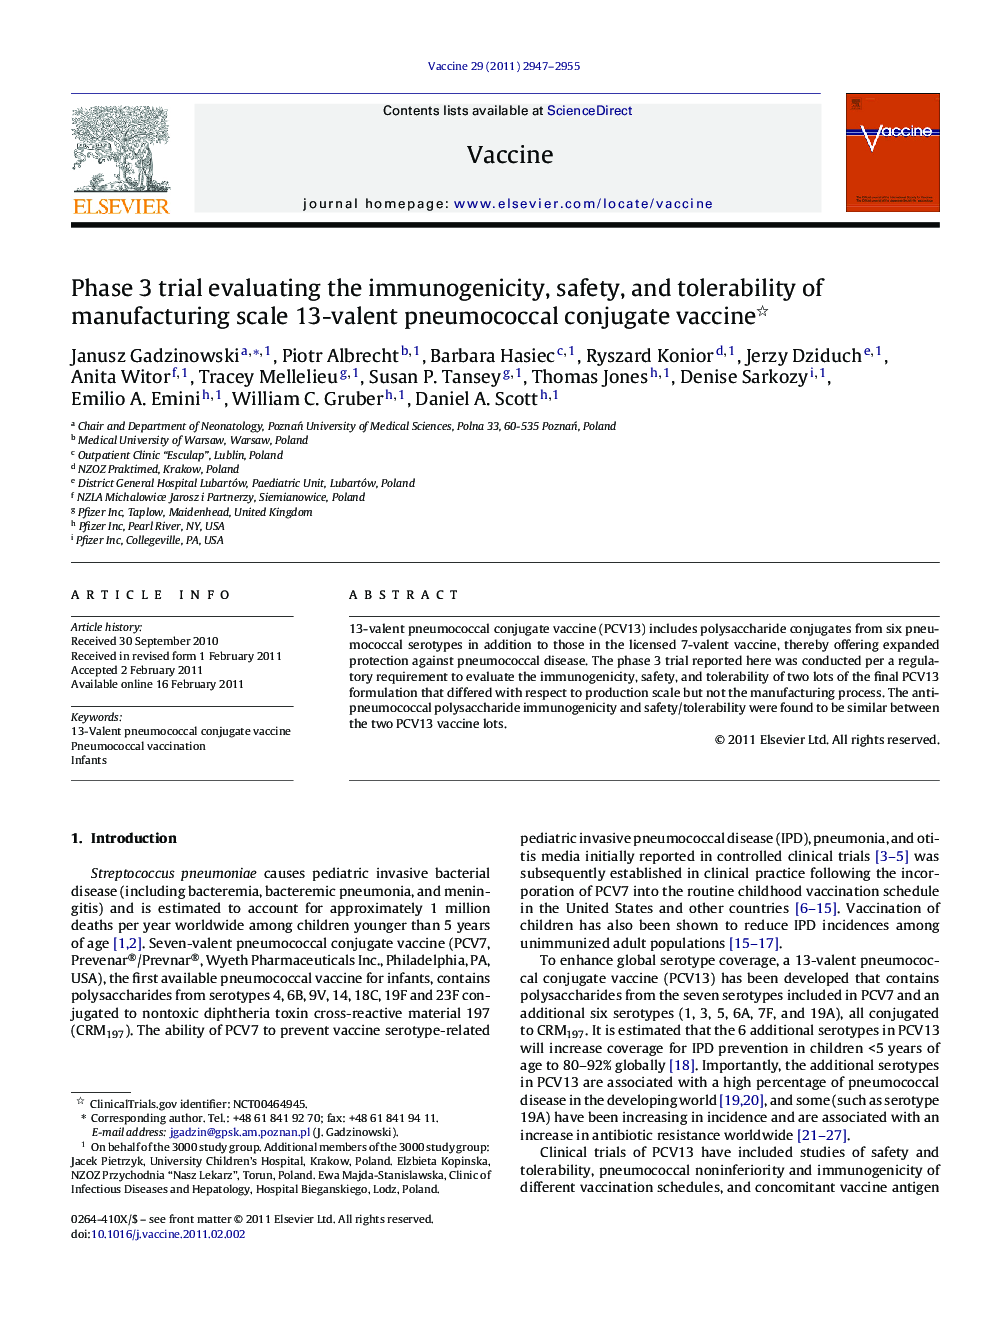 Phase 3 trial evaluating the immunogenicity, safety, and tolerability of manufacturing scale 13-valent pneumococcal conjugate vaccine 